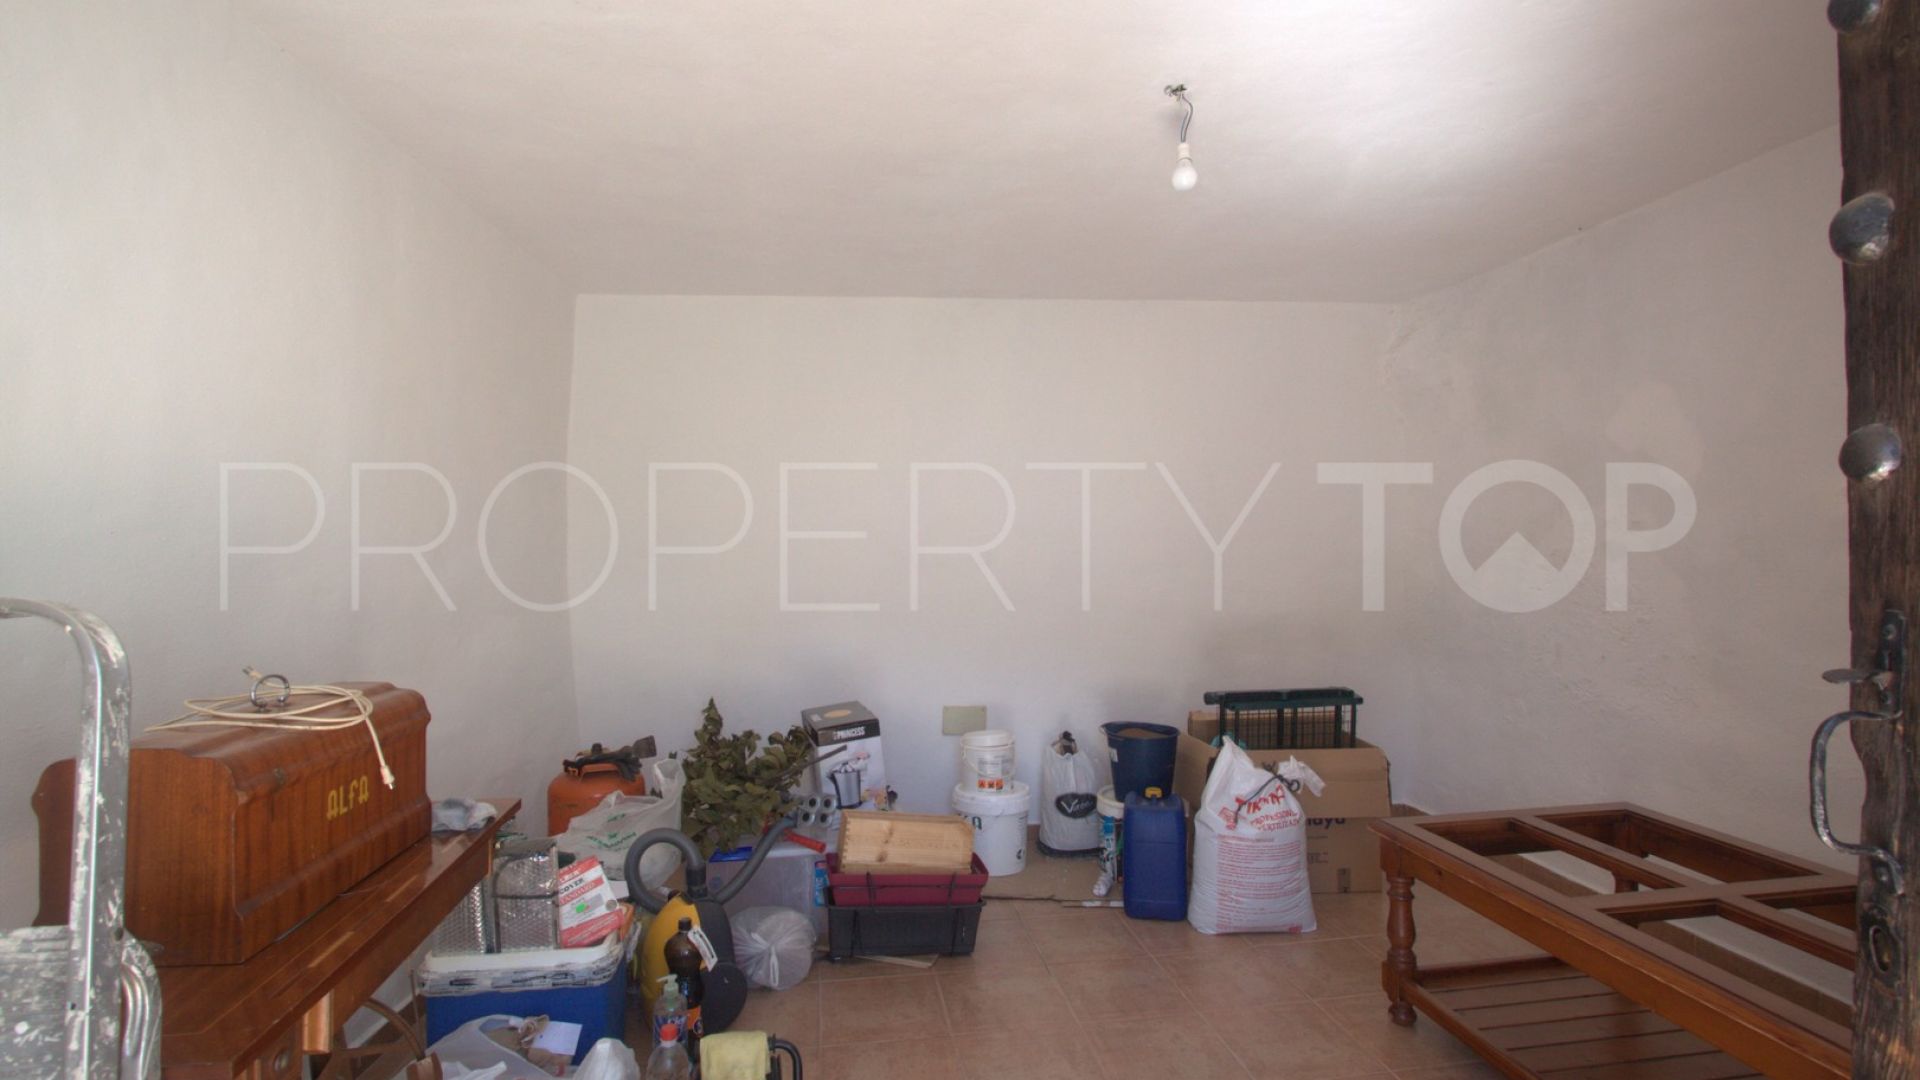 For sale house in Pueblo with 3 bedrooms